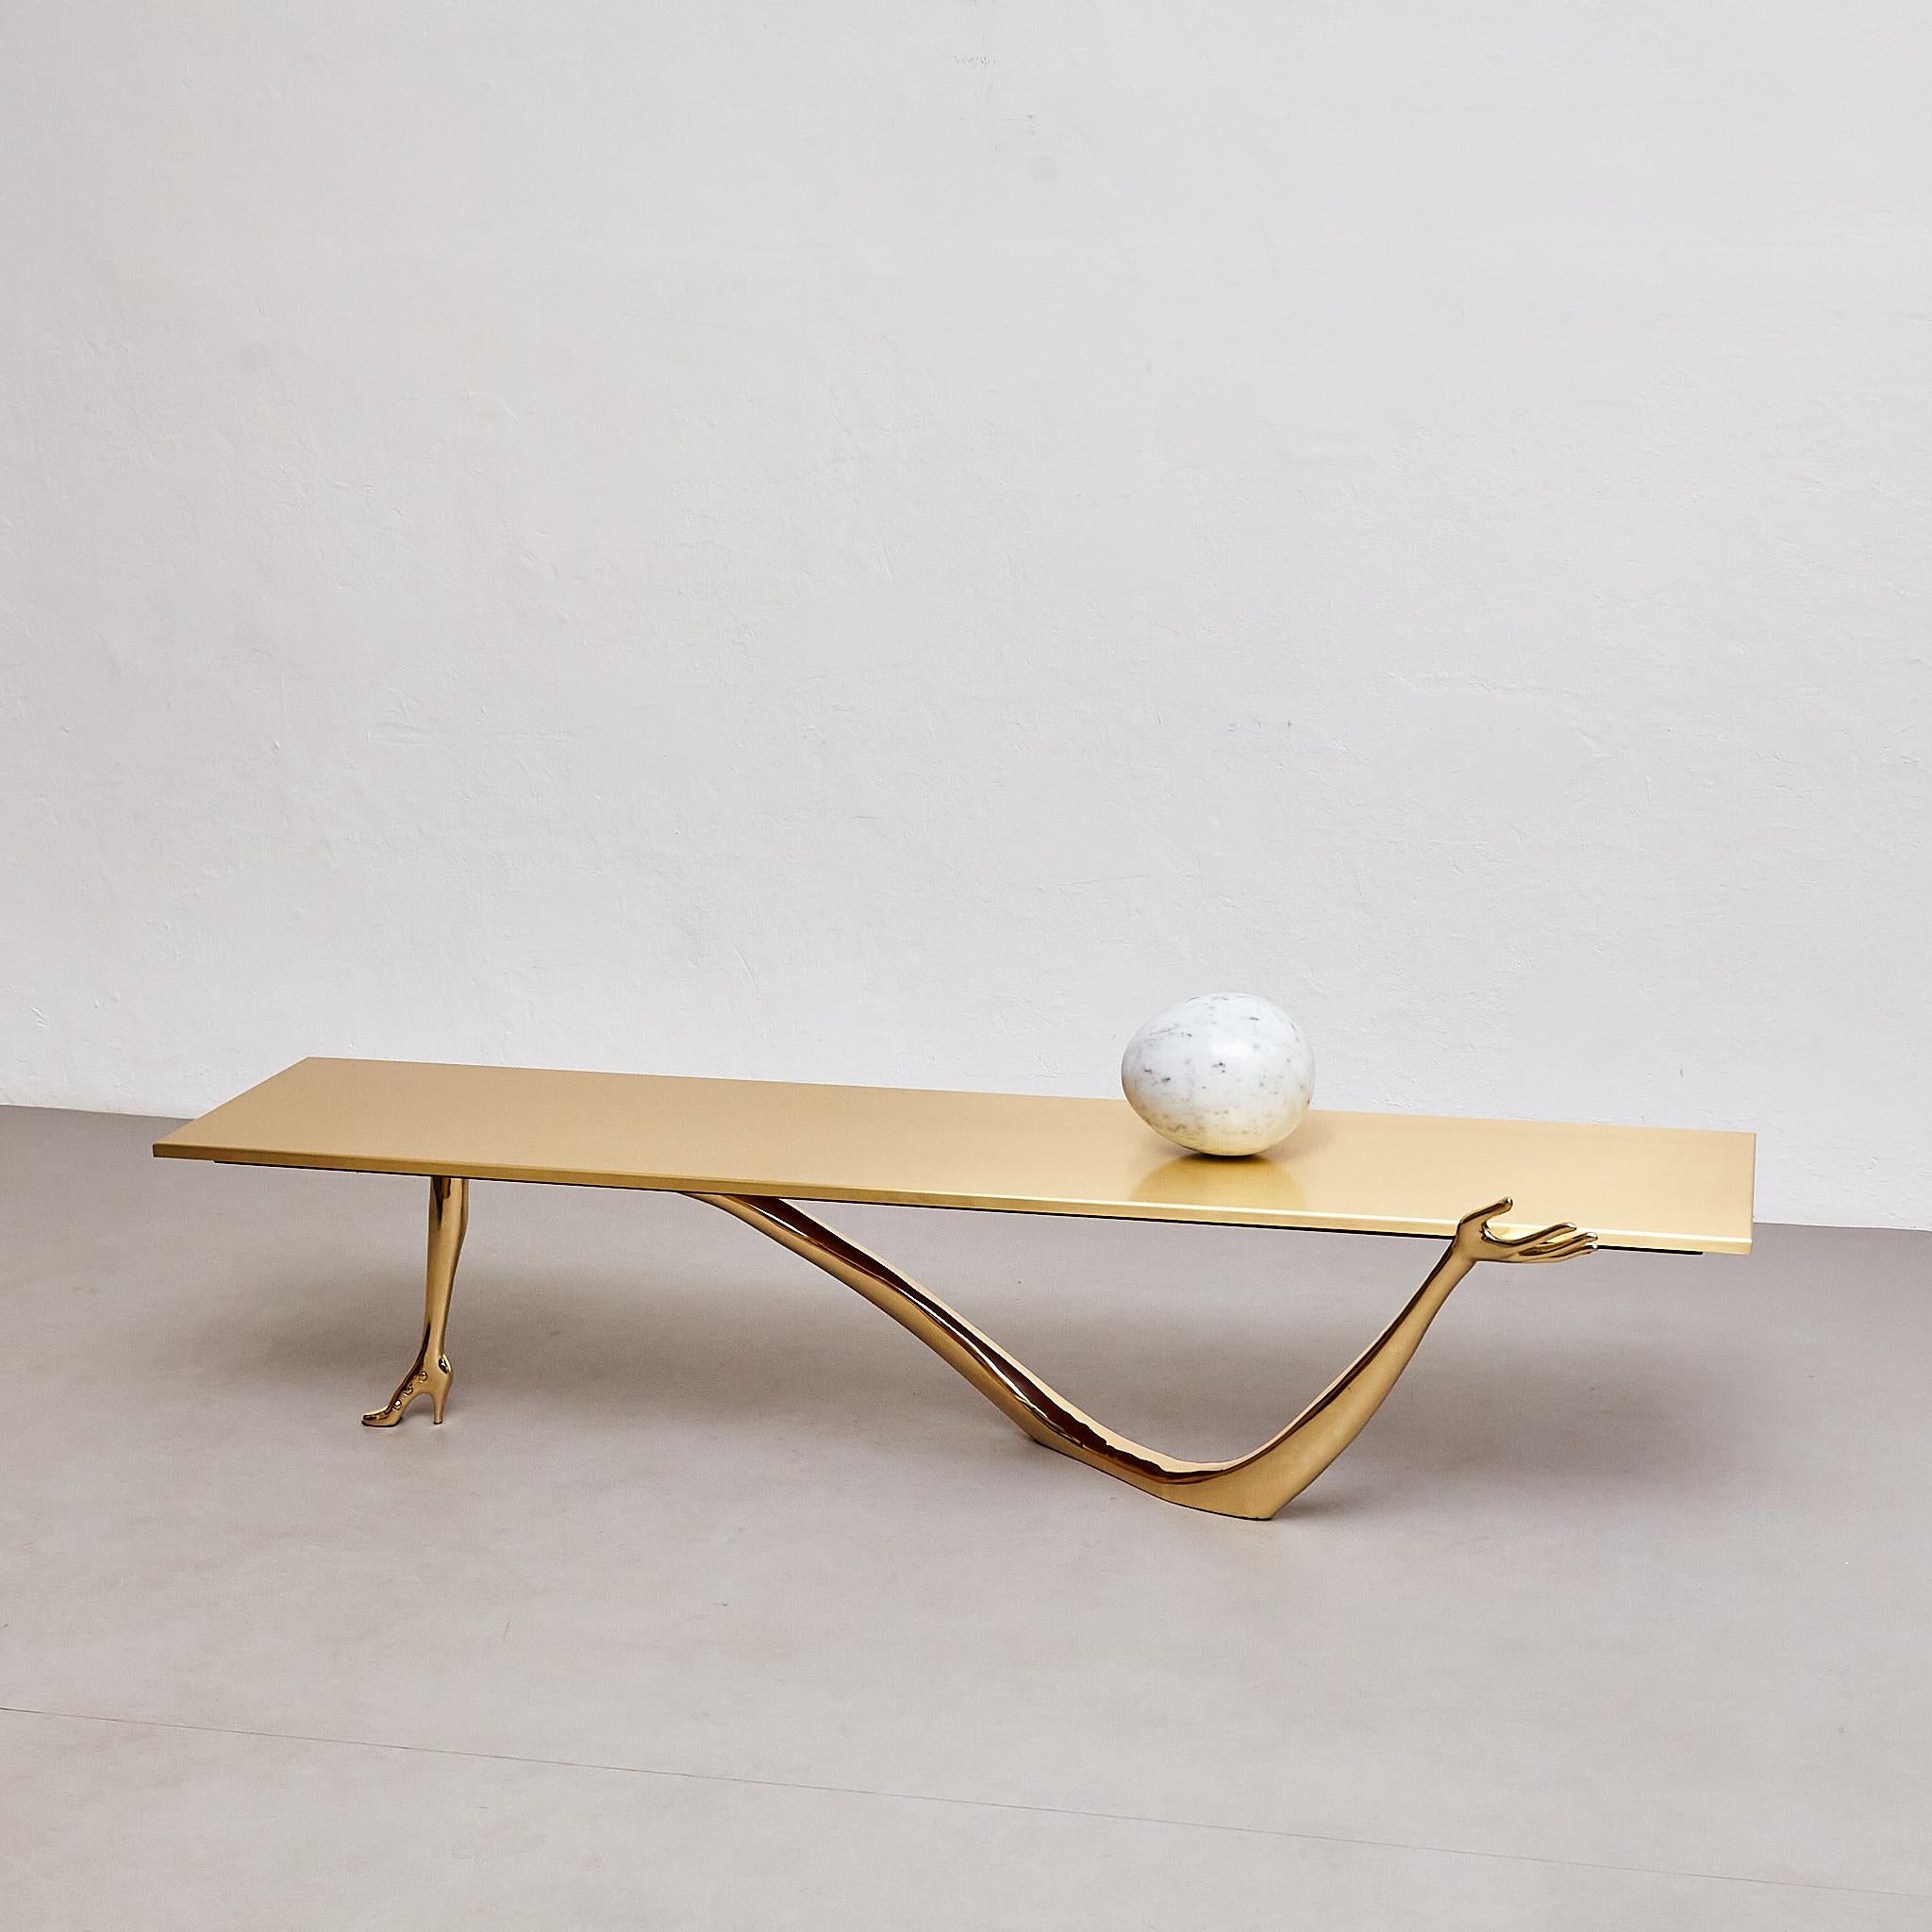 Spanish Elegance Redefined: The Leda Low Table by Dalí and BD – Artistry in Every Detail